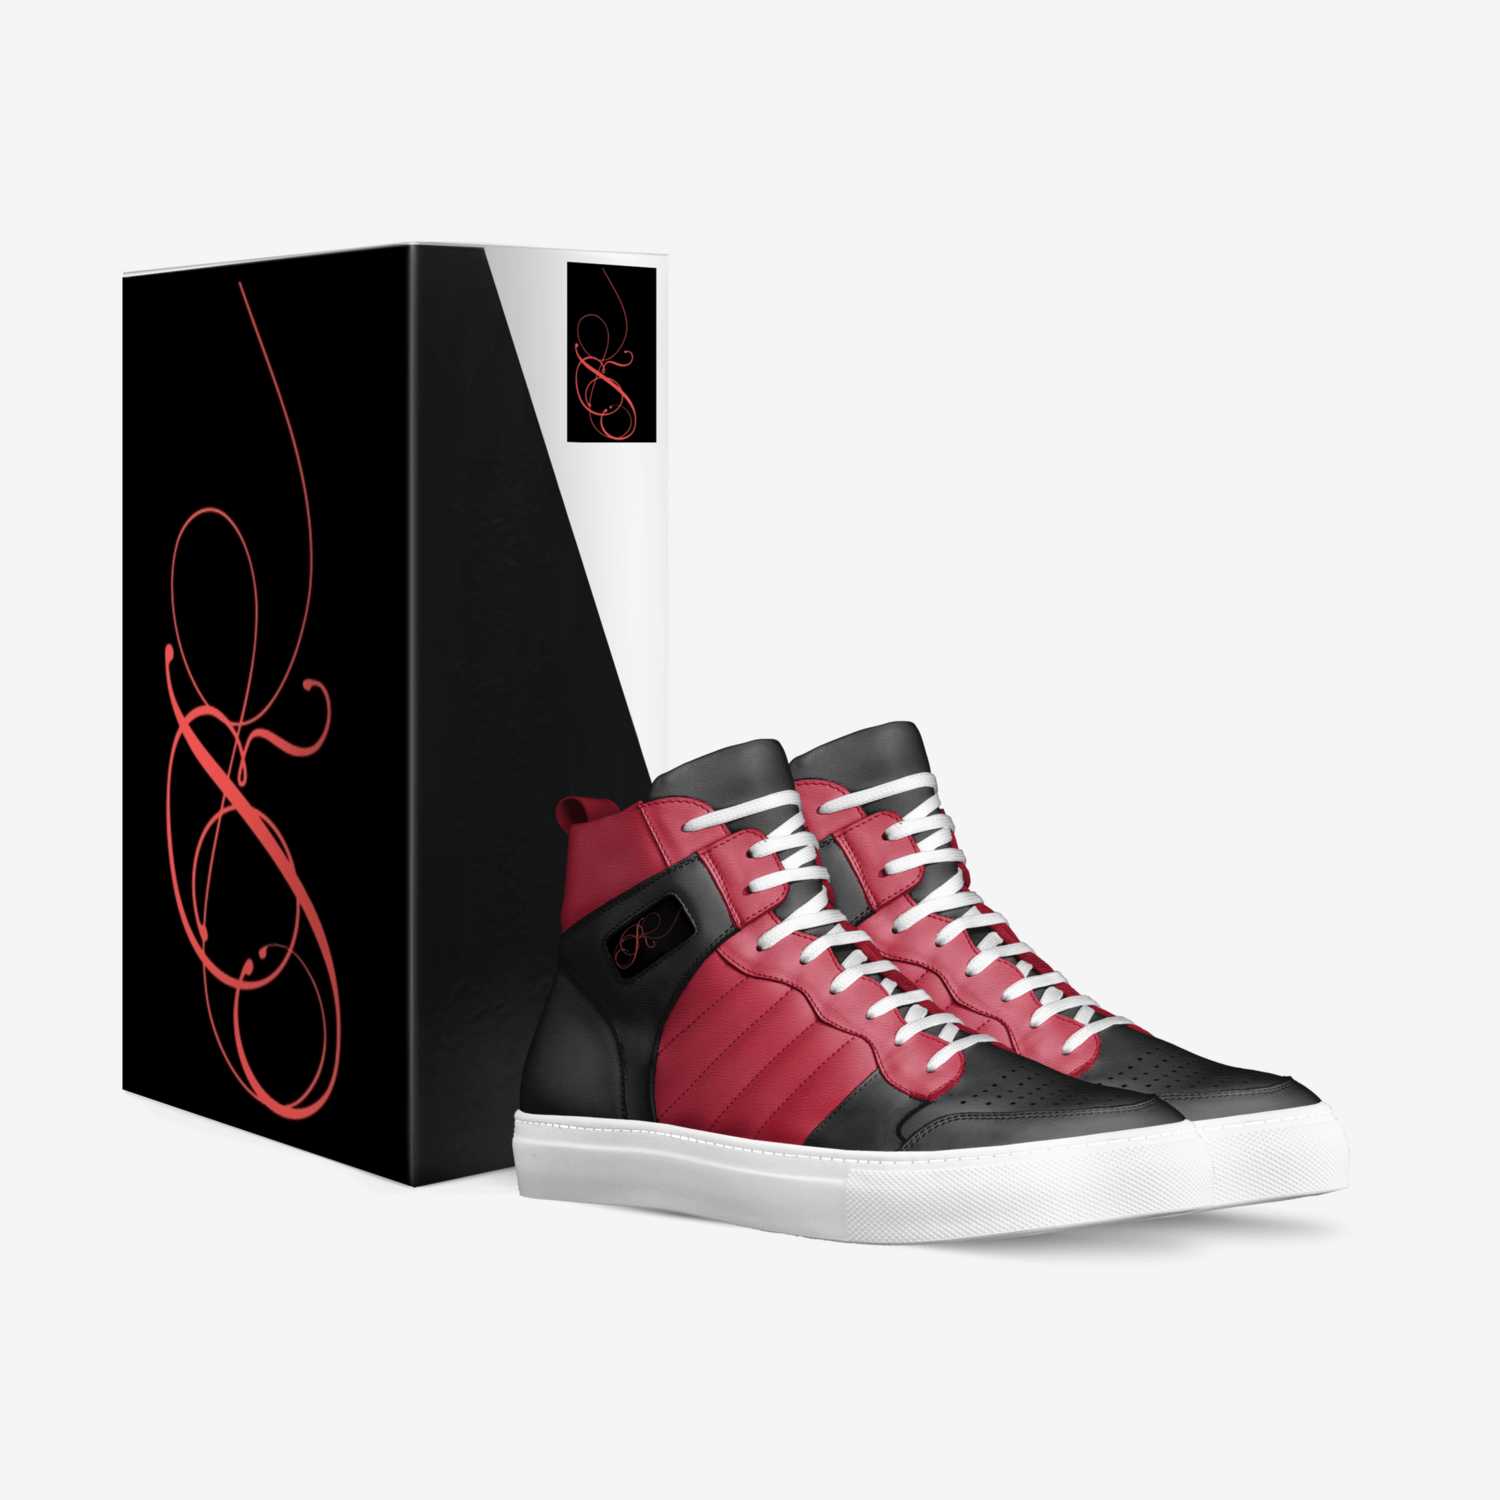 RedRoyaltyFootwear custom made in Italy shoes by Steven Agee | Box view